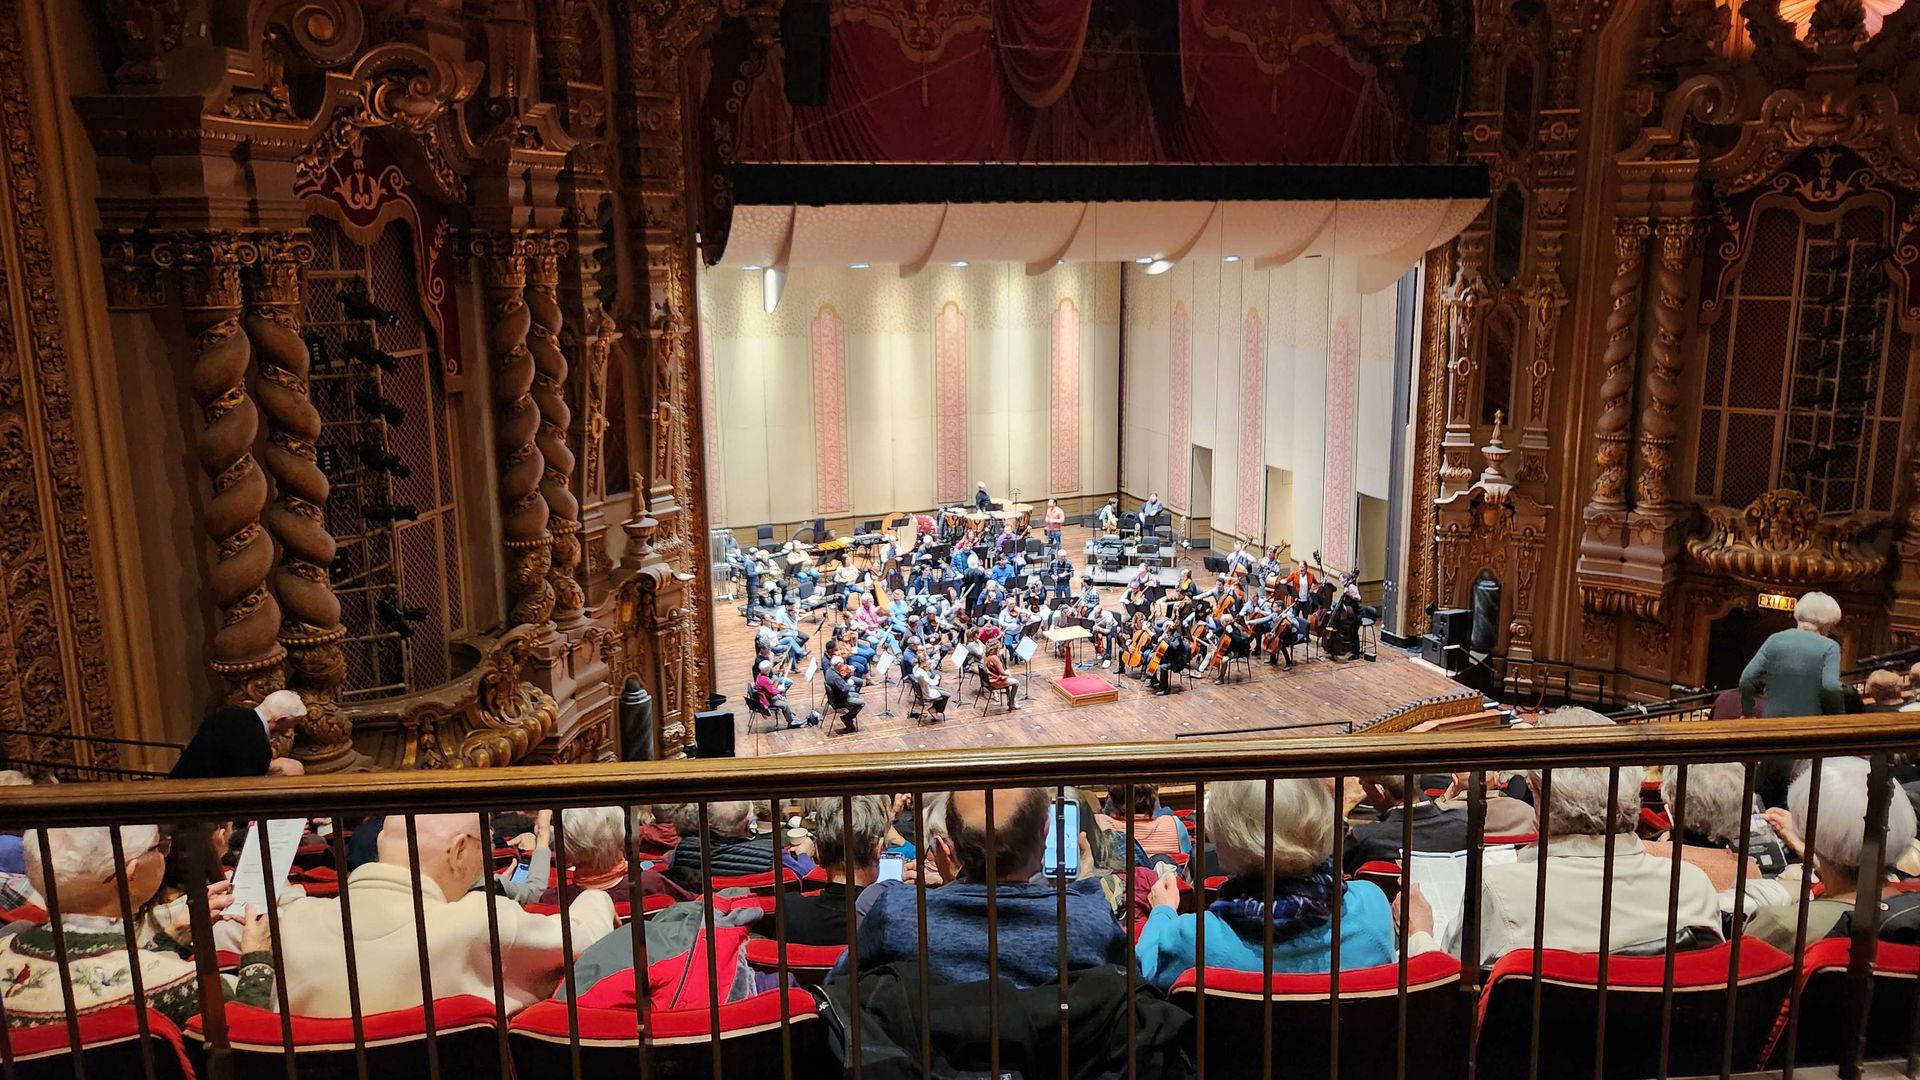 A balcony view of an orchestra rehearsal, with players on stage.